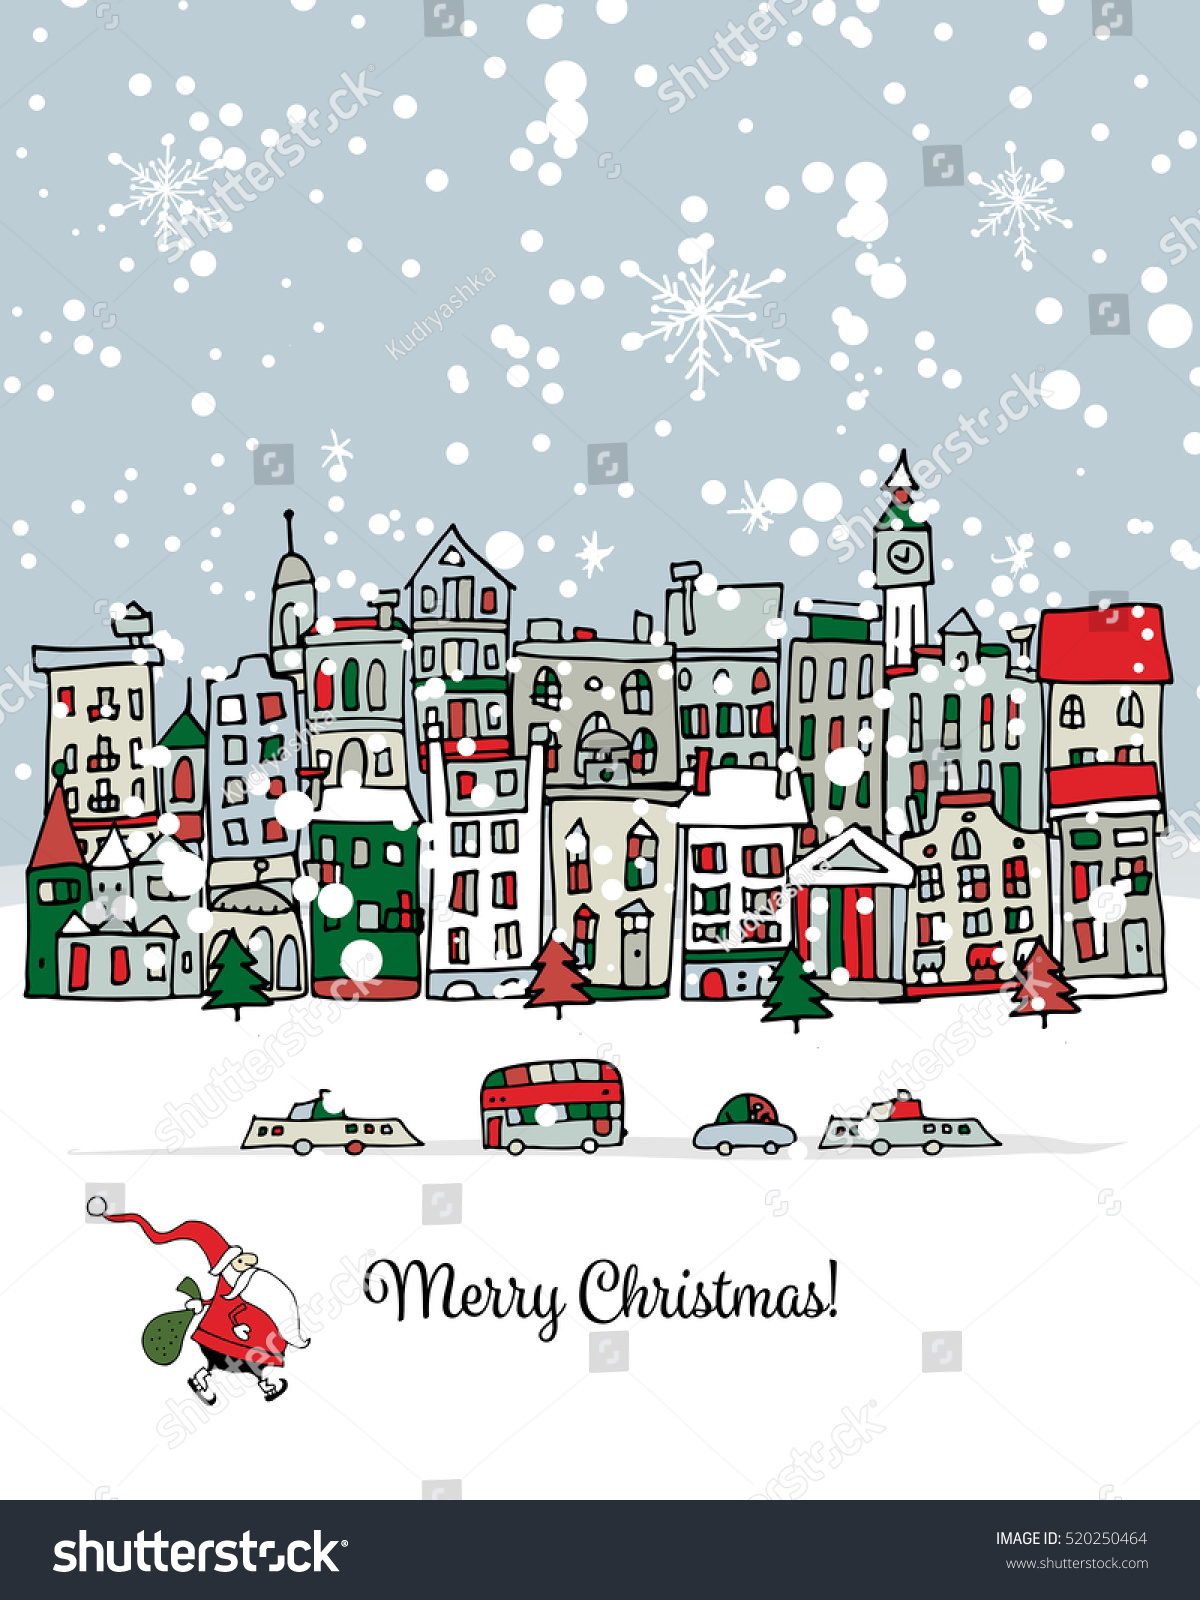 Merry christmas postcard with cityscape background Vector illustration